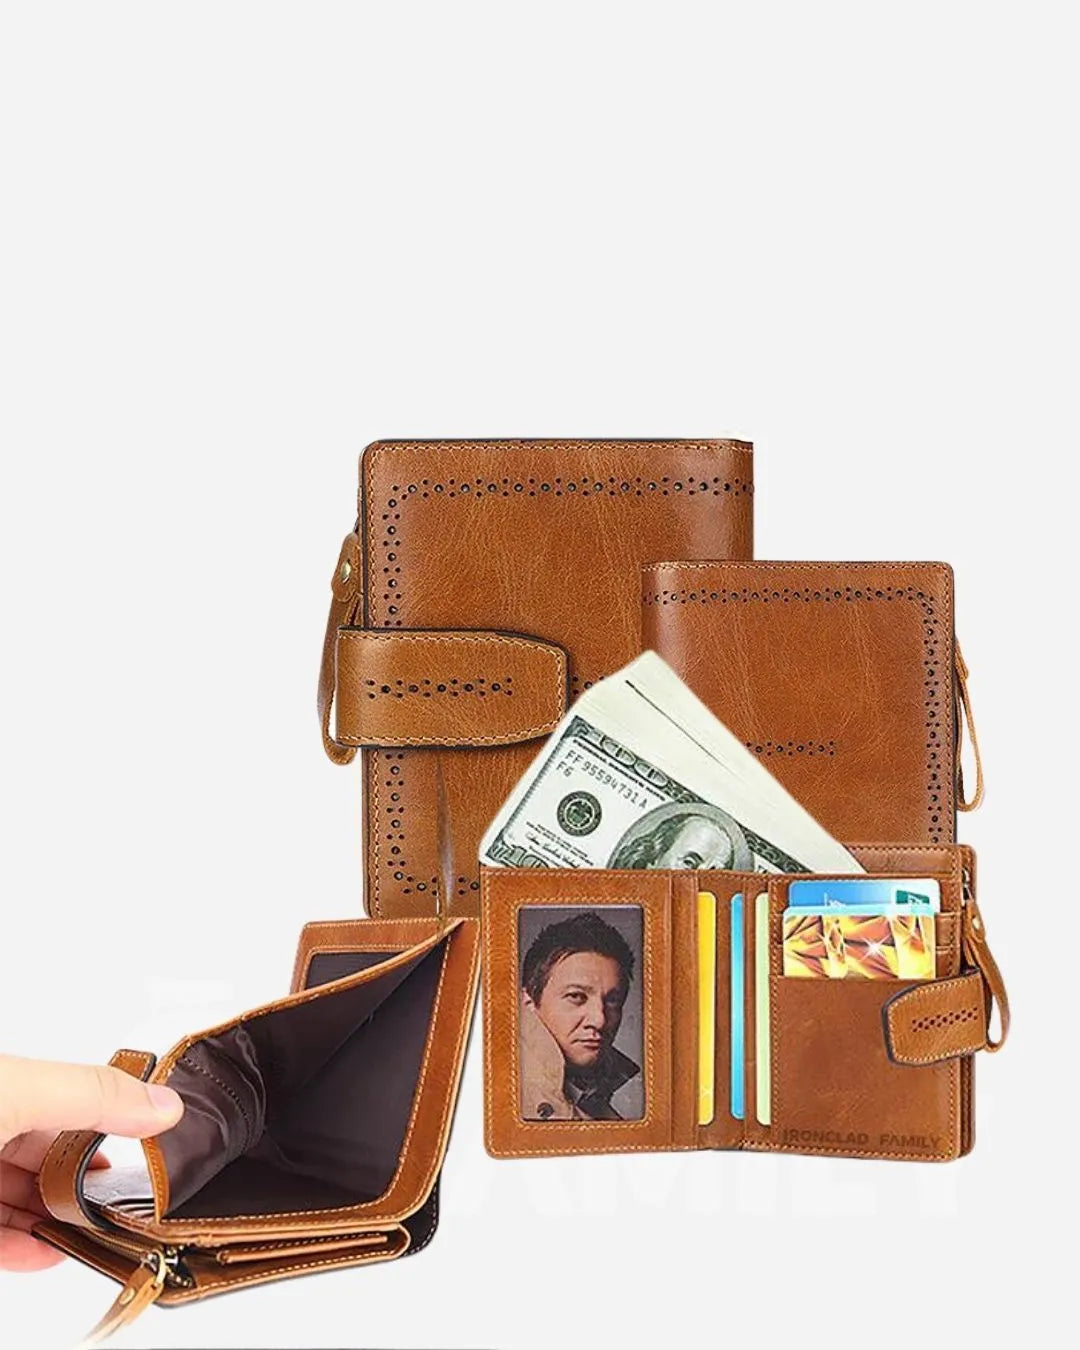 RFID Blocking Leather Wallet in a demonstration with a man holding a dollar bill